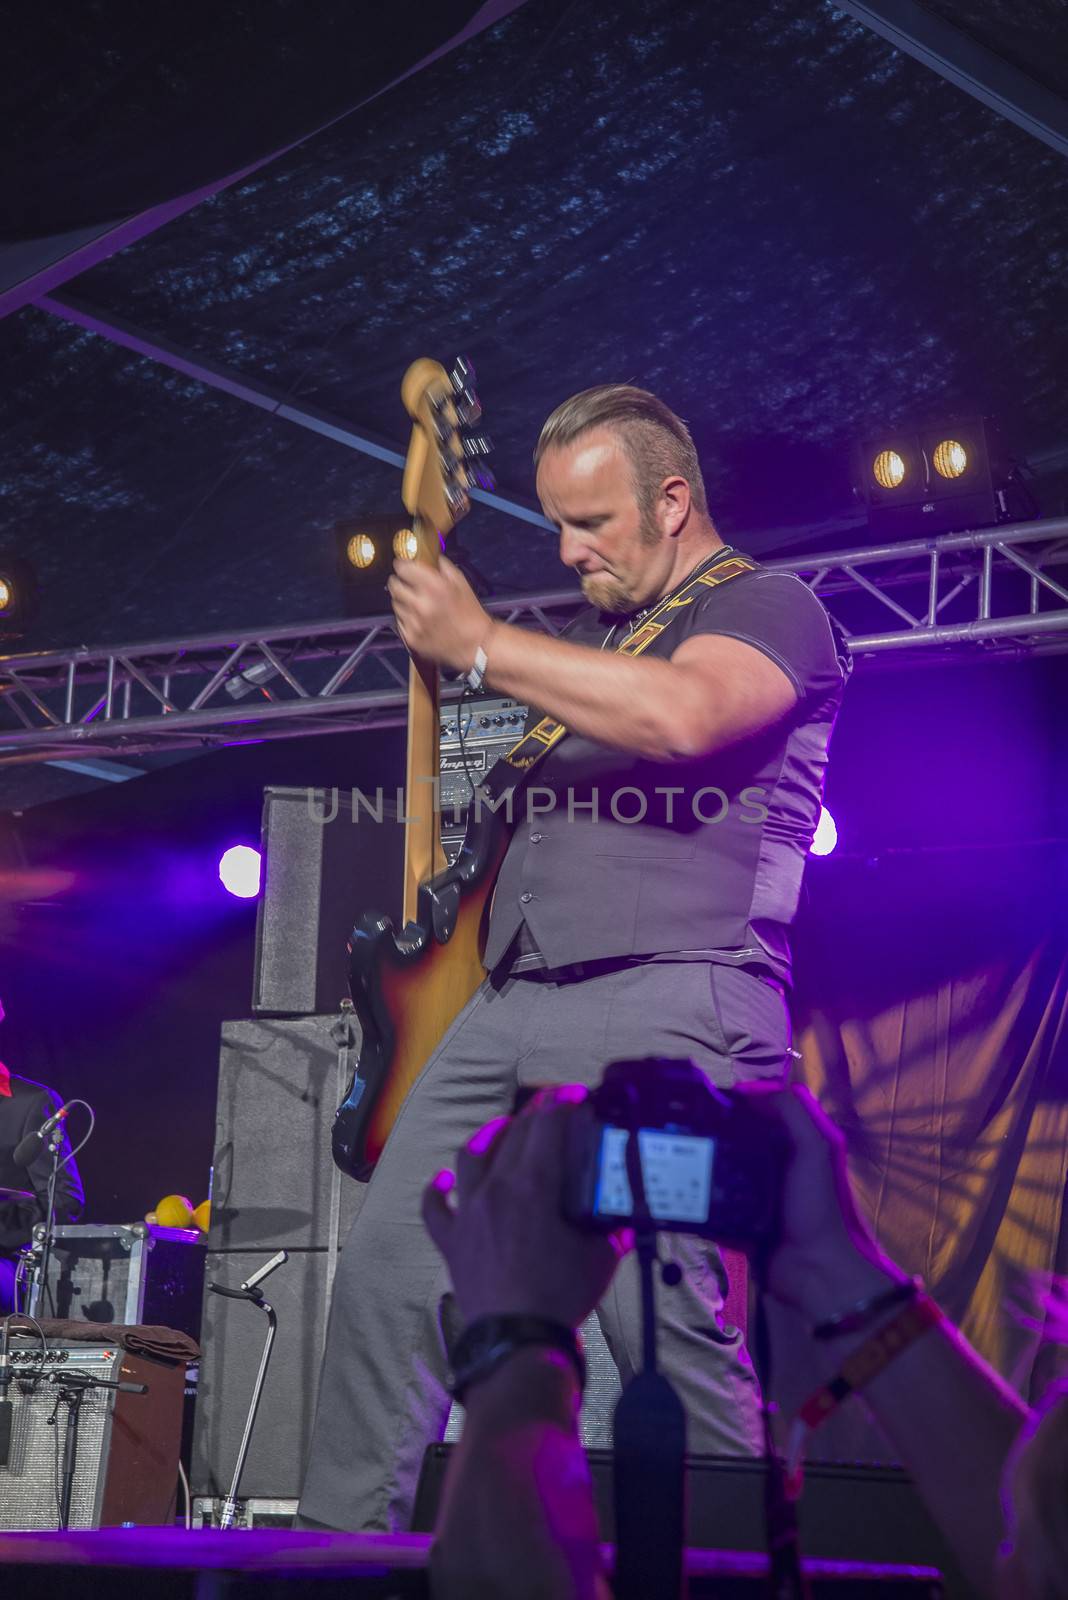 Each year the first week in August held a blues festival in Notodden, Norway. Photo is shot from the concert with a local band called: Little Andrew Band. The band members are: Vocals and guitar Andreas Stamnes (Little Andrew ), bass: Paul M.Dahl��, drums: Robert Skoglund, piano: Daniel T. R��ssing